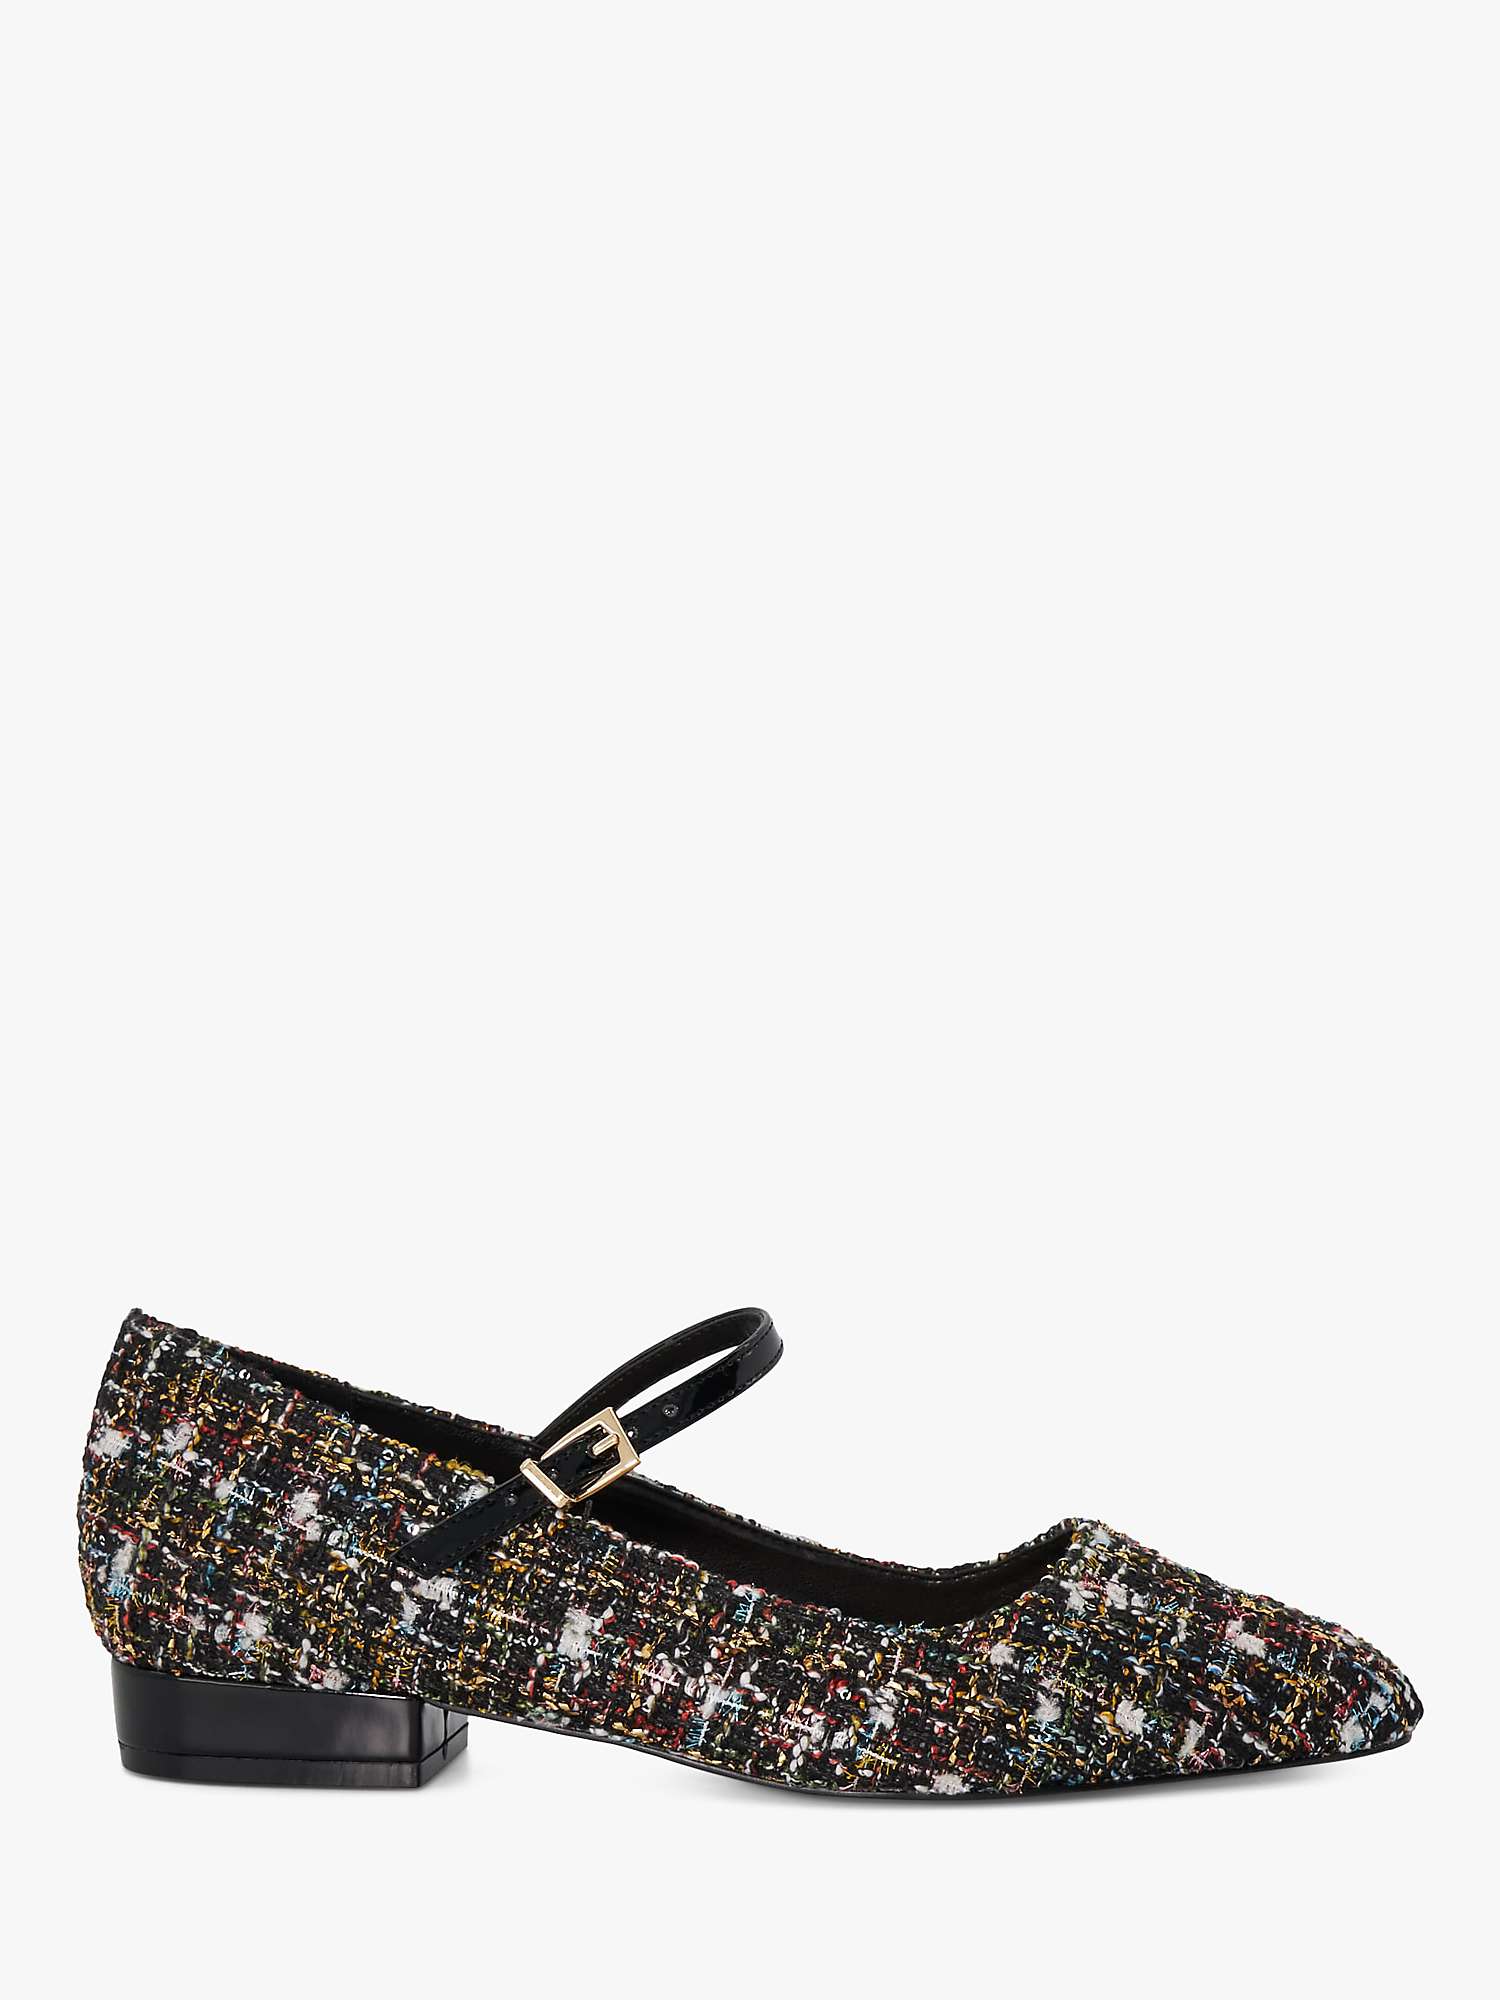 Buy Dune Halliee Fabric Mary Jane Shoes, Black Online at johnlewis.com